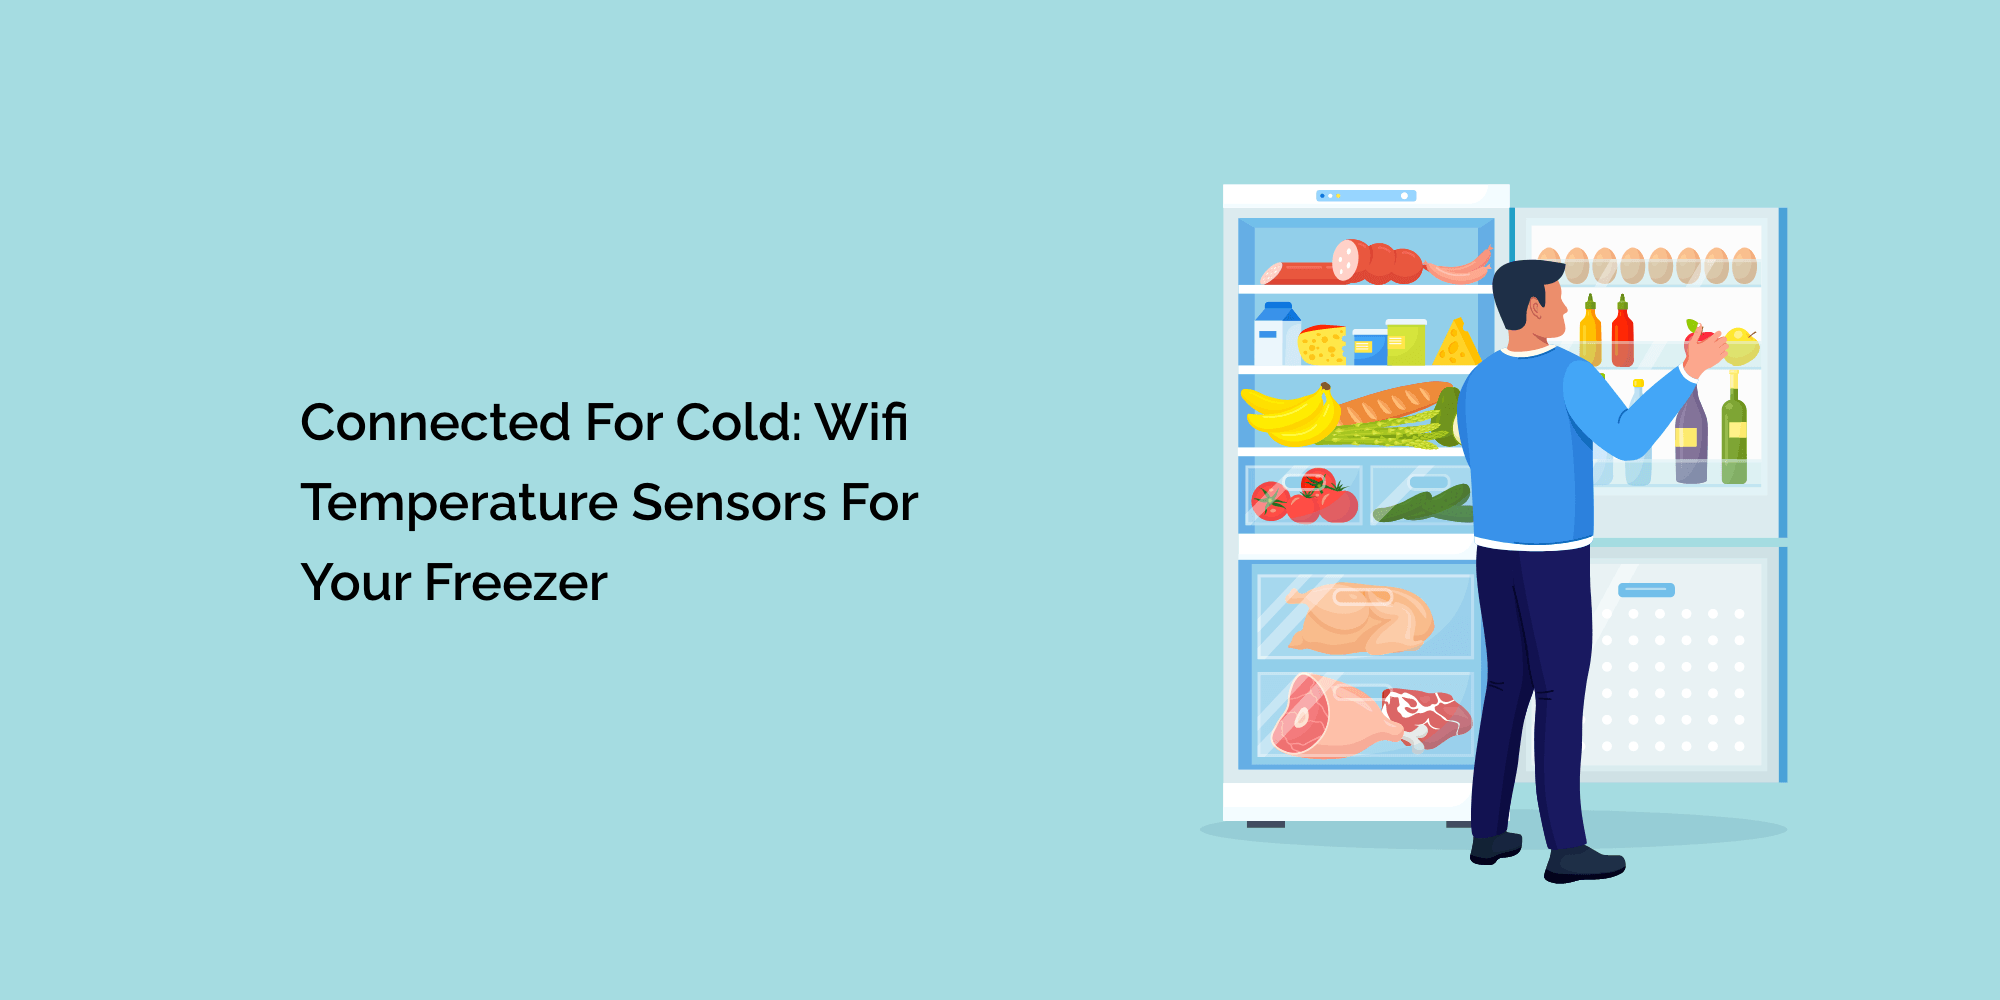 Connected For Cold: WiFi Temperature Sensors For Your Freezer